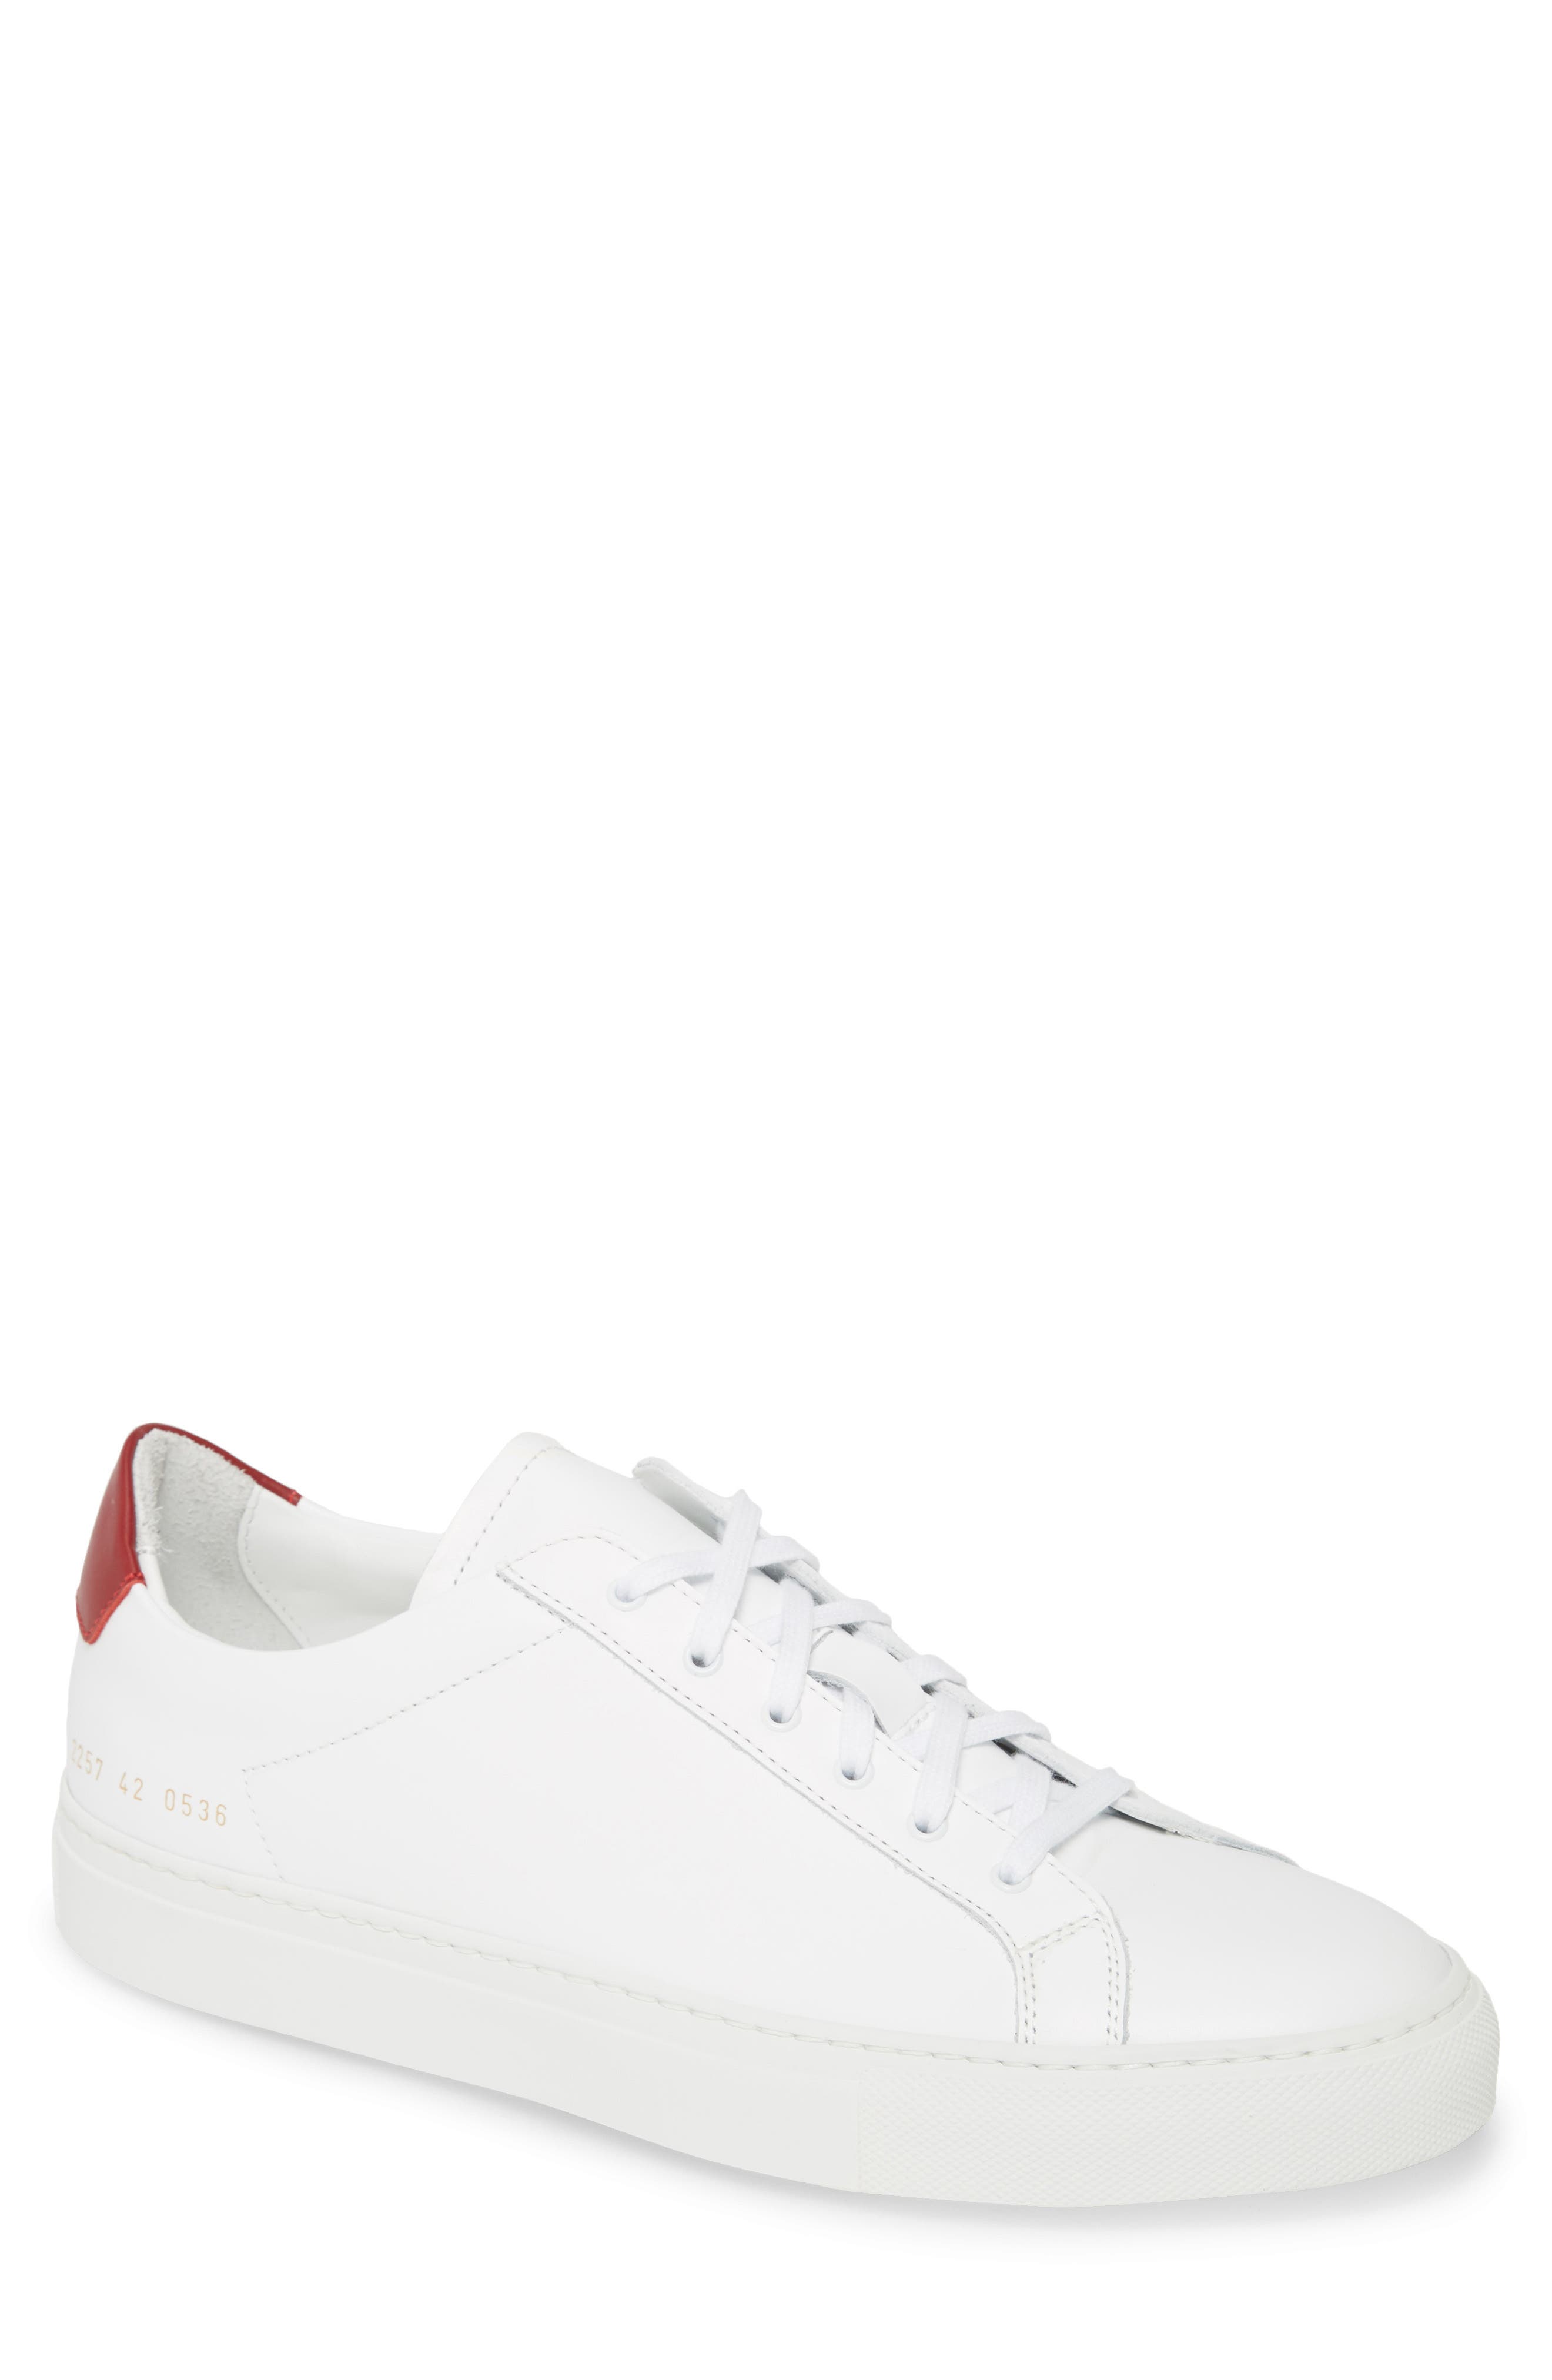 Men's Common Projects Shoes | Nordstrom